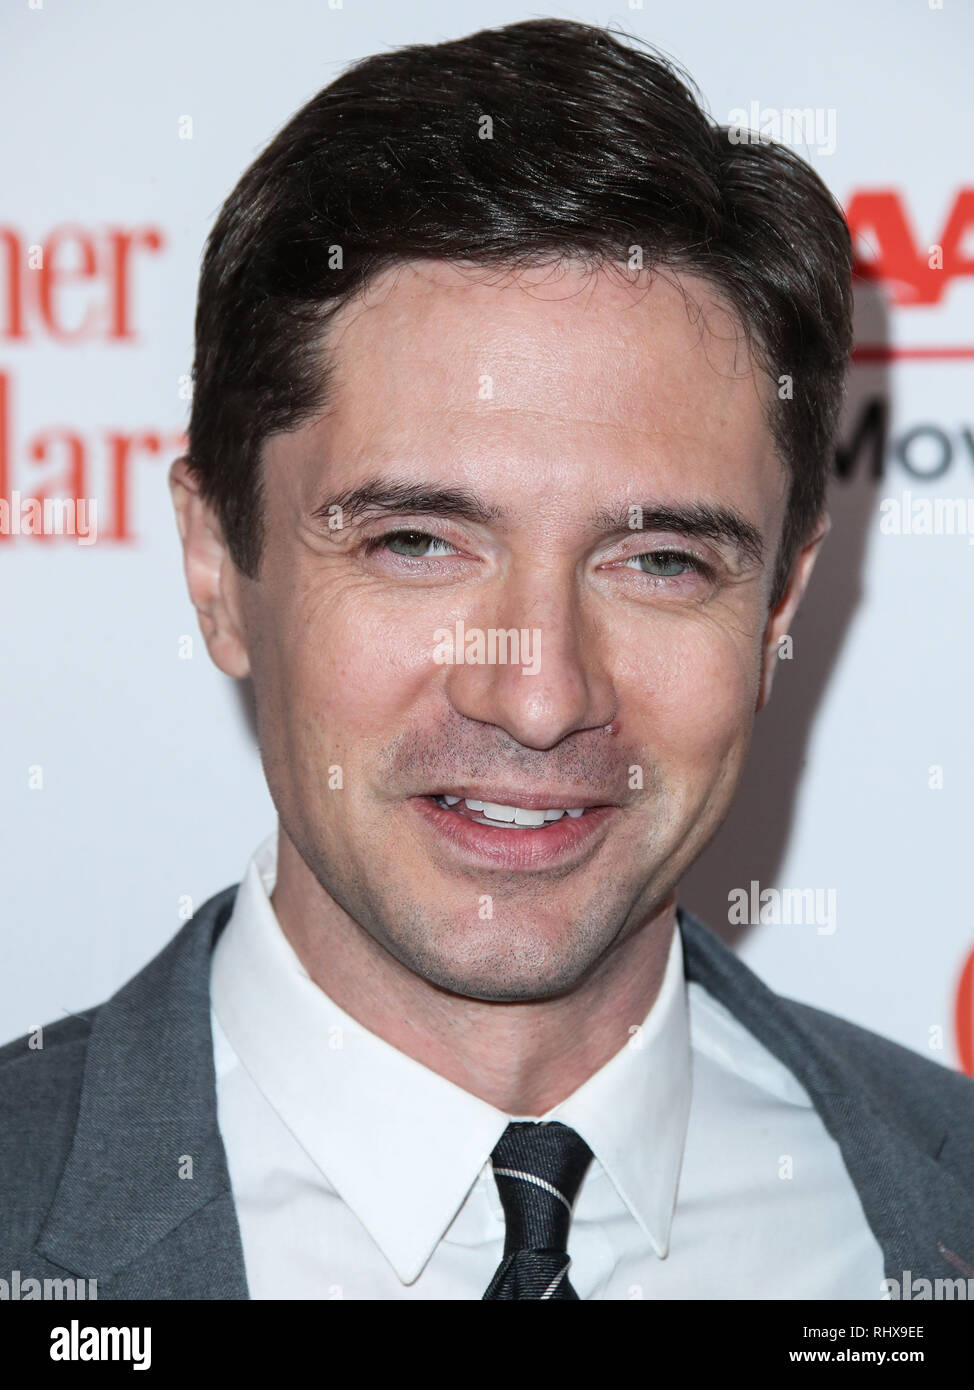 BEVERLY HILLS, LOS ANGELES, CA, USA - FEBRUARY 04: Actor Topher Grace arrives at the AARP The Magazine's 18th Annual Movies for Grownups Awards held at the Beverly Wilshire Four Seasons Hotel on February 4, 2019 in Beverly Hills, Los Angeles, California, United States. (Photo by Xavier Collin/Image Press Agency) Stock Photo